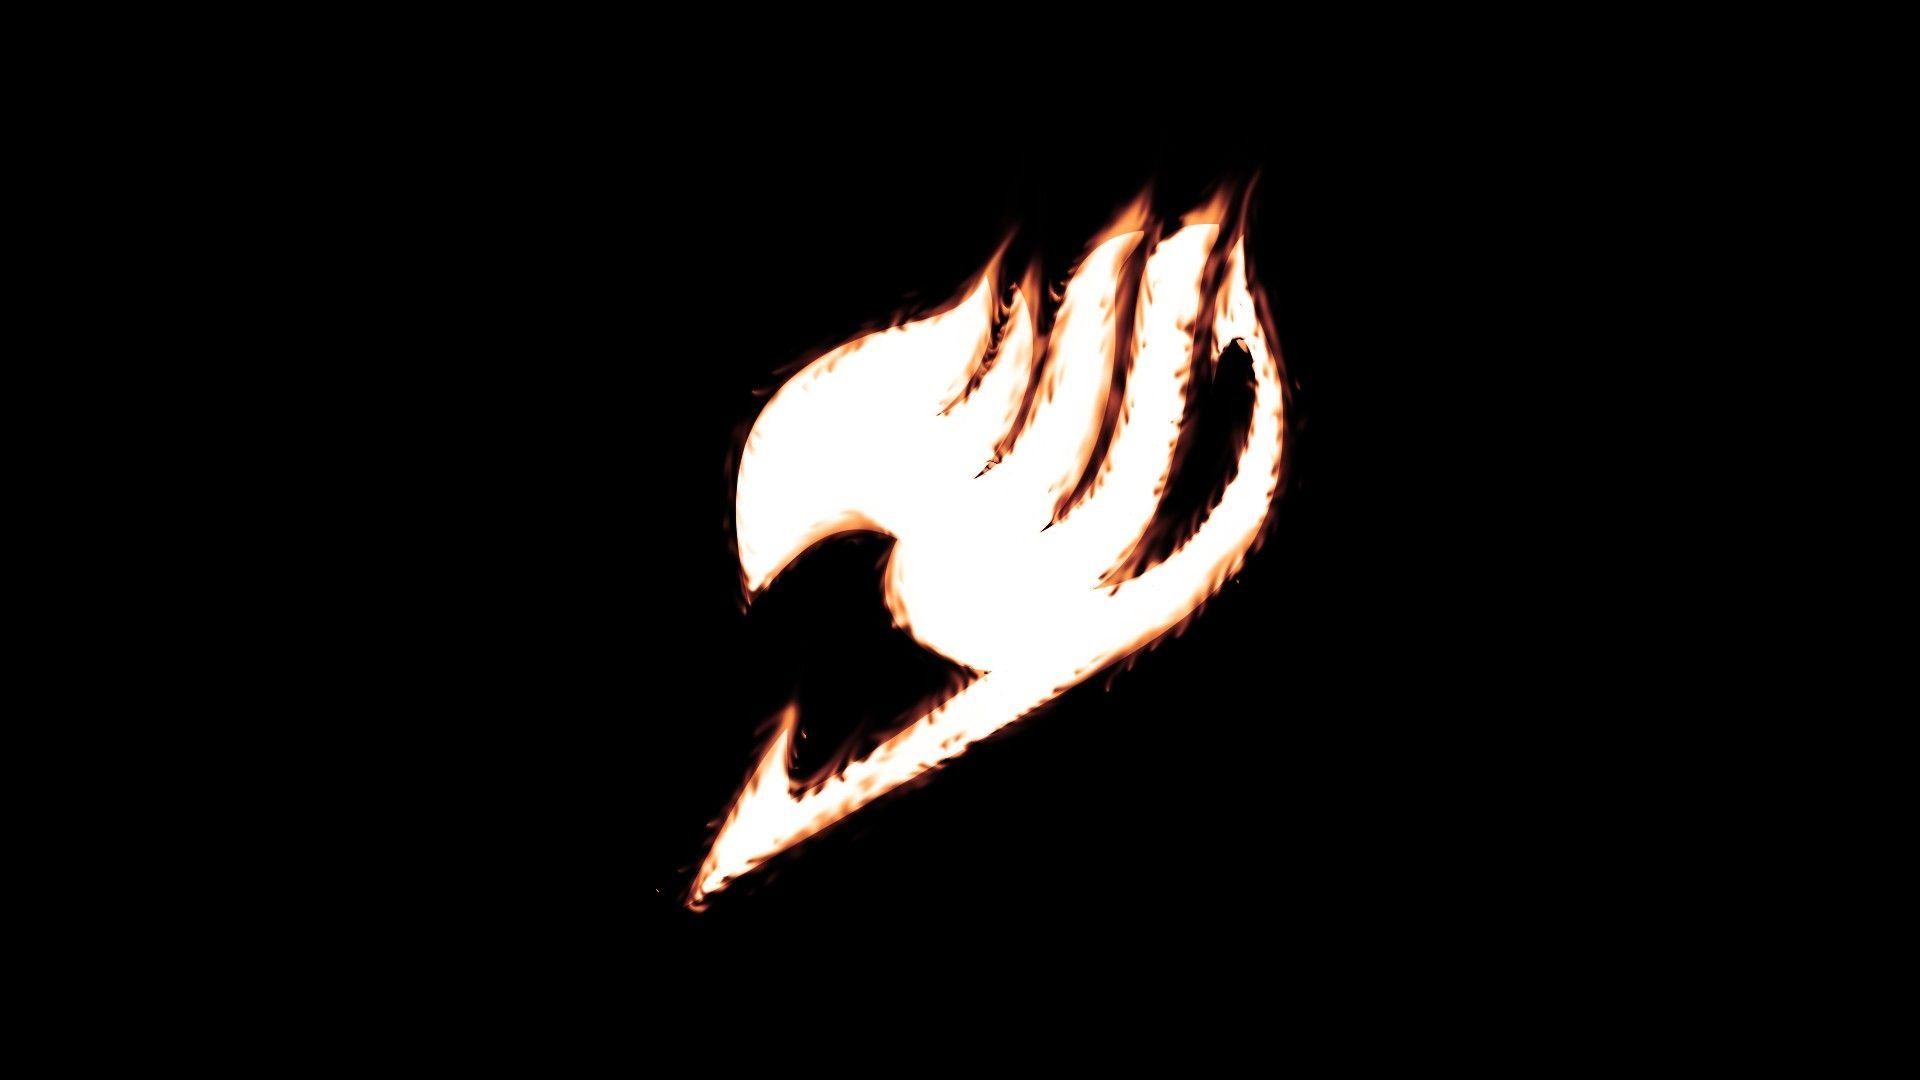 1920x1080 Fairy Tail Logo Wallpapers For Computer | HD Wallpapers | Desktop .